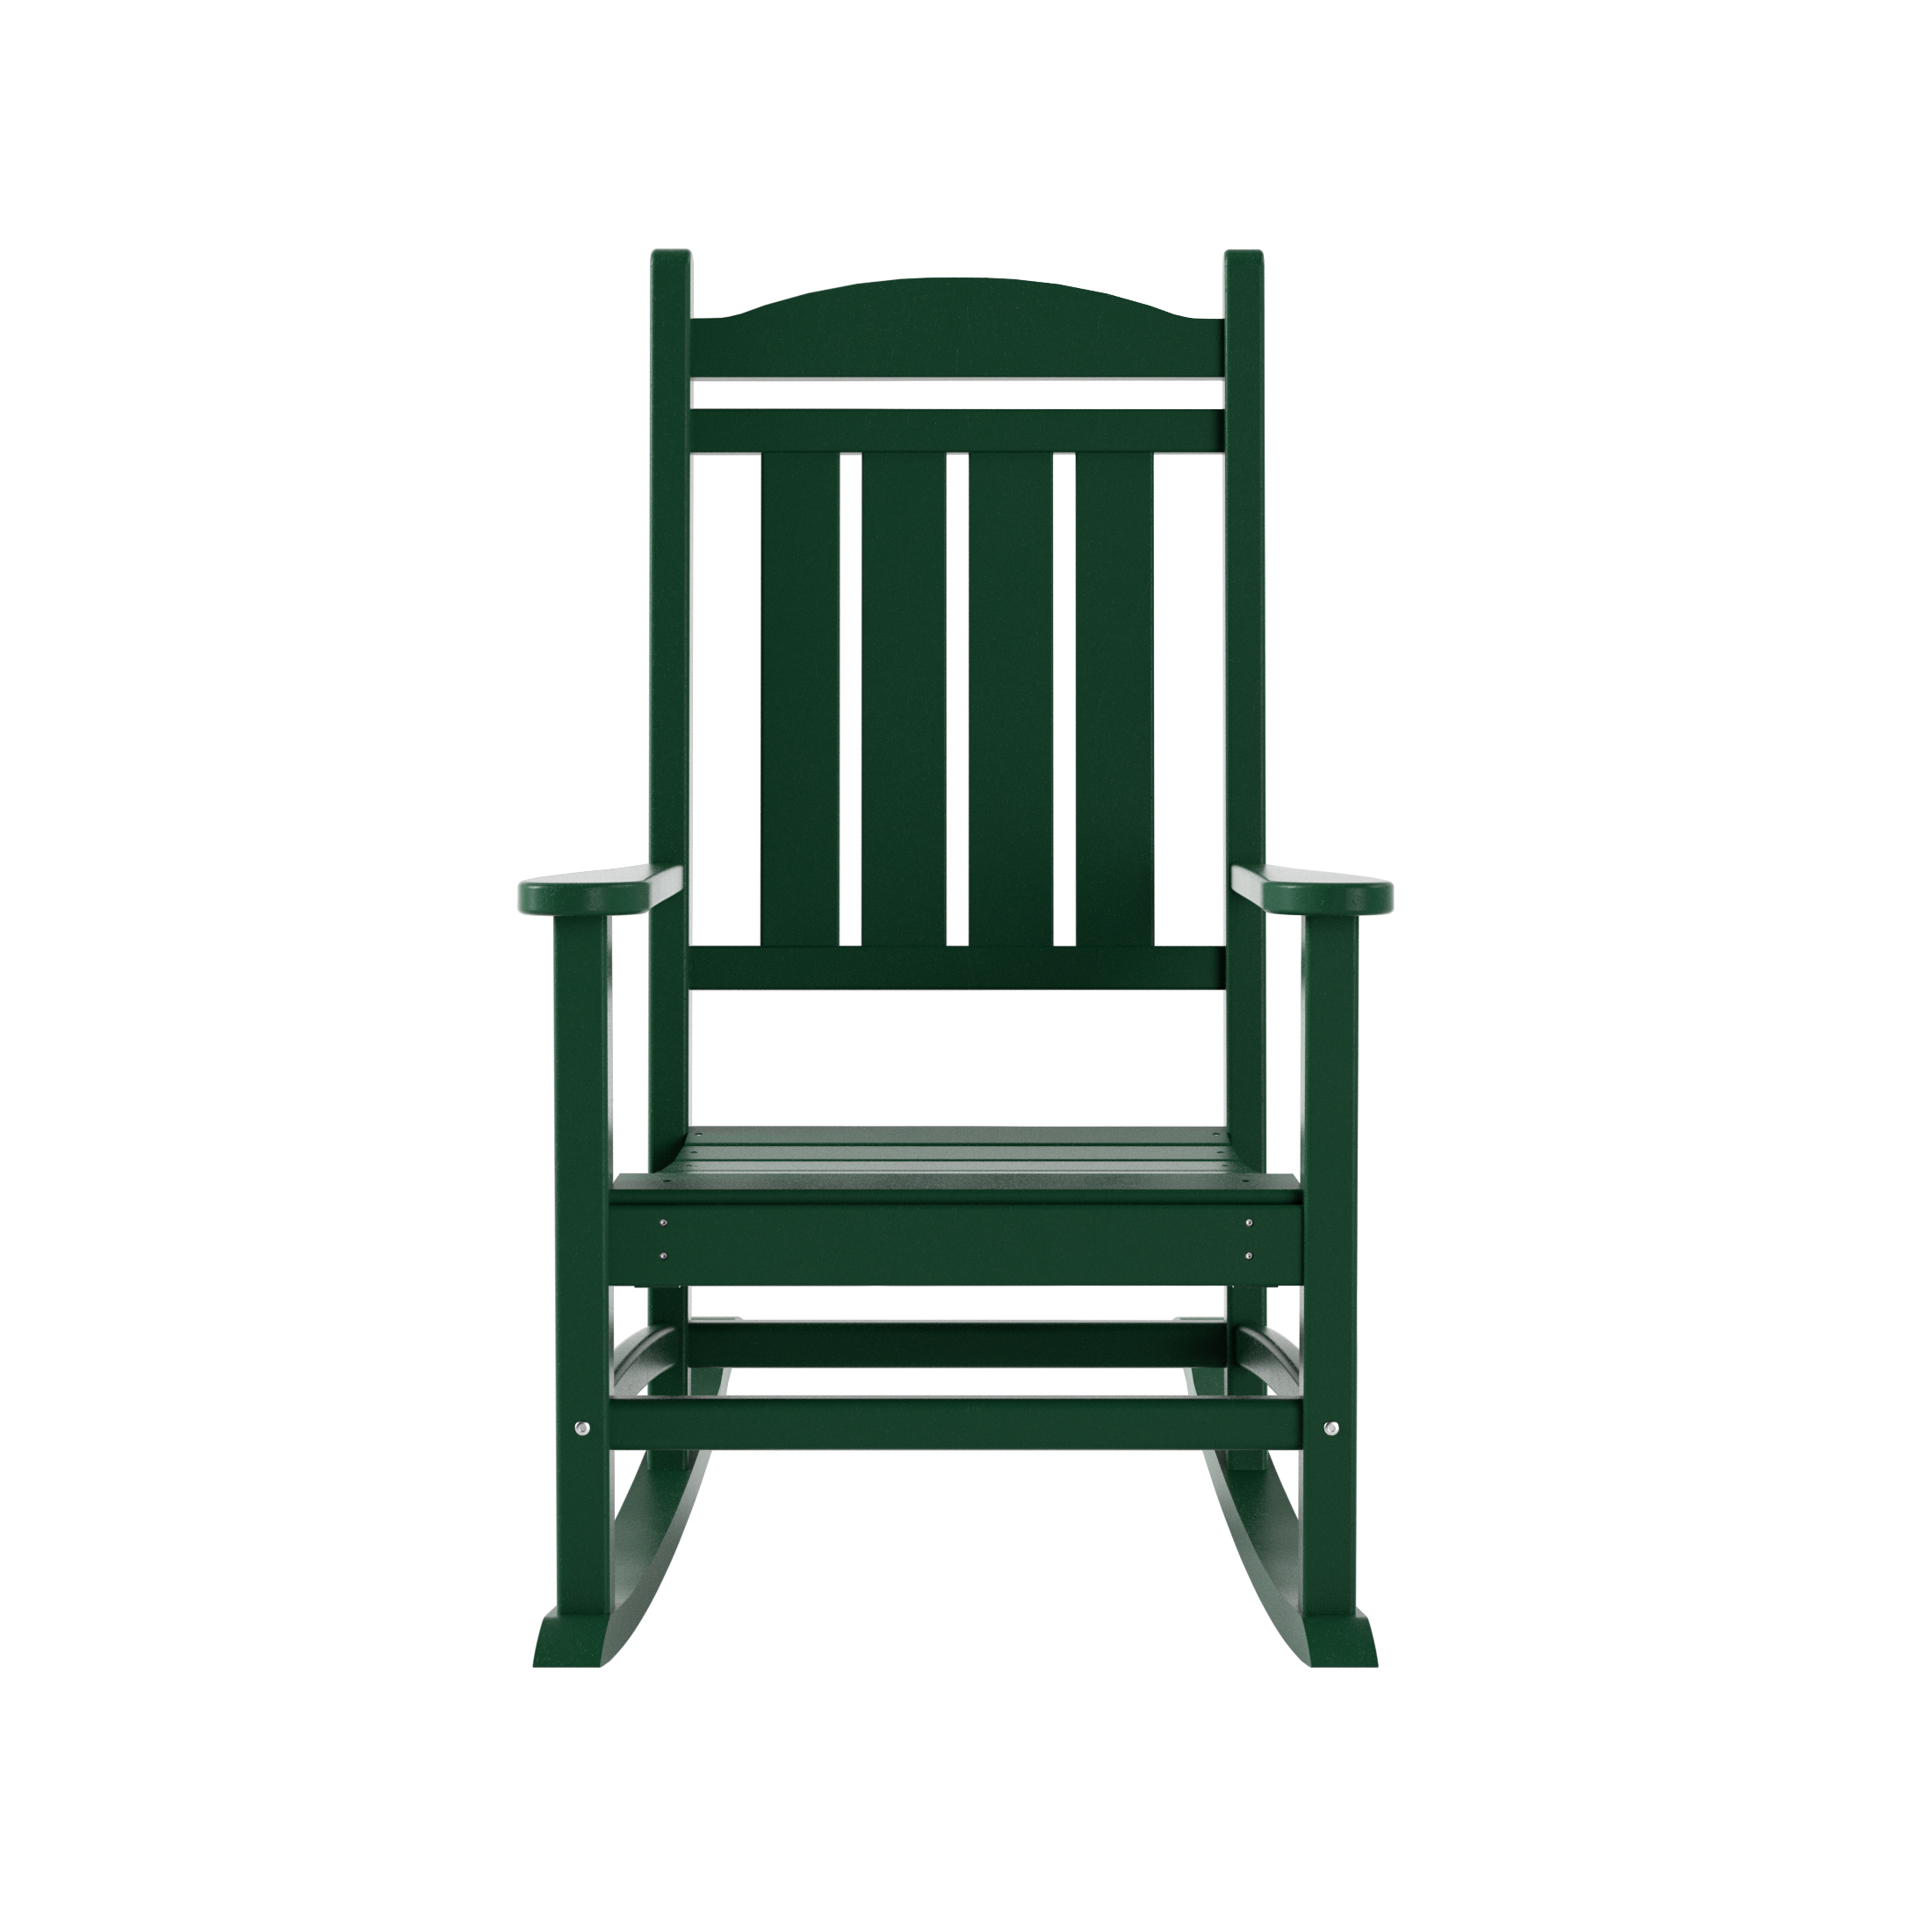 Costaelm Paradise Classic Plastic Porch Rocking Chair, Dark Green - image 3 of 9